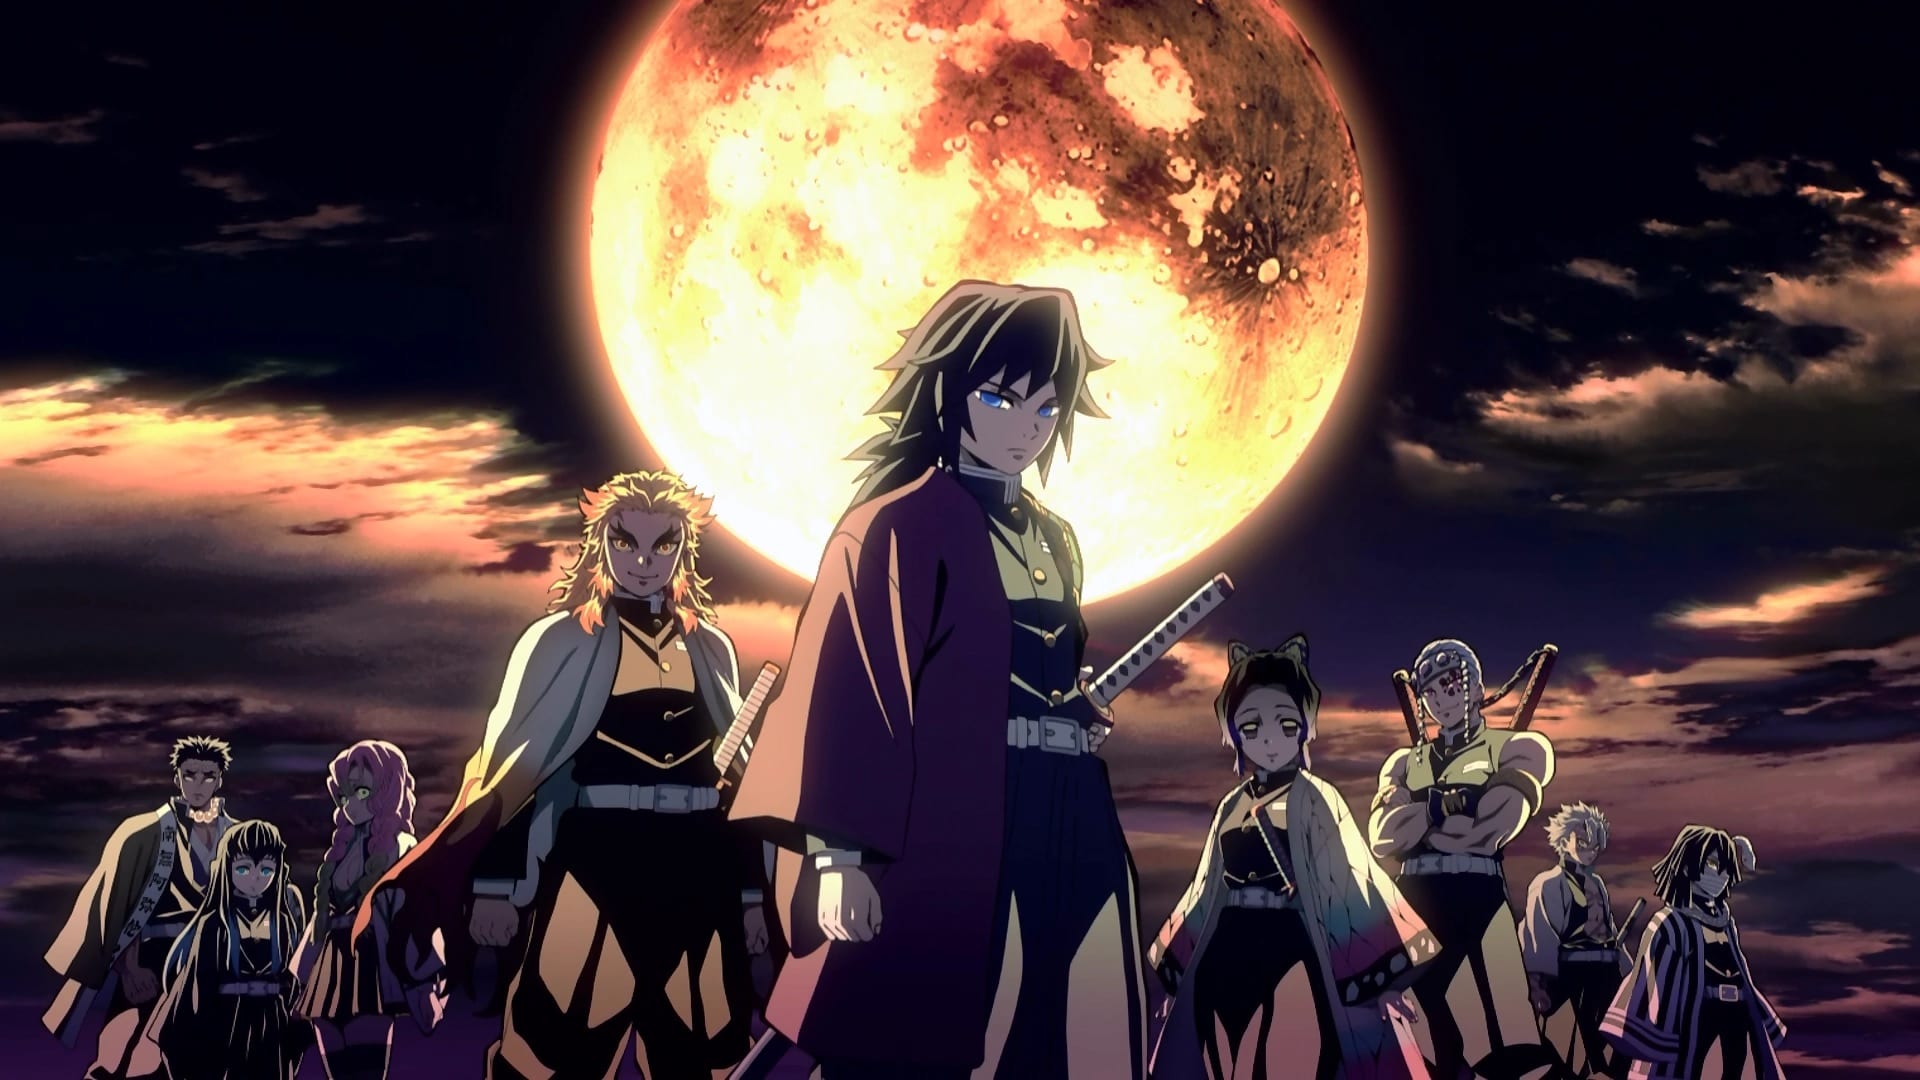 Which Demon Slayer Pillar (Hashira) Are You? Take This Quiz to Find Out